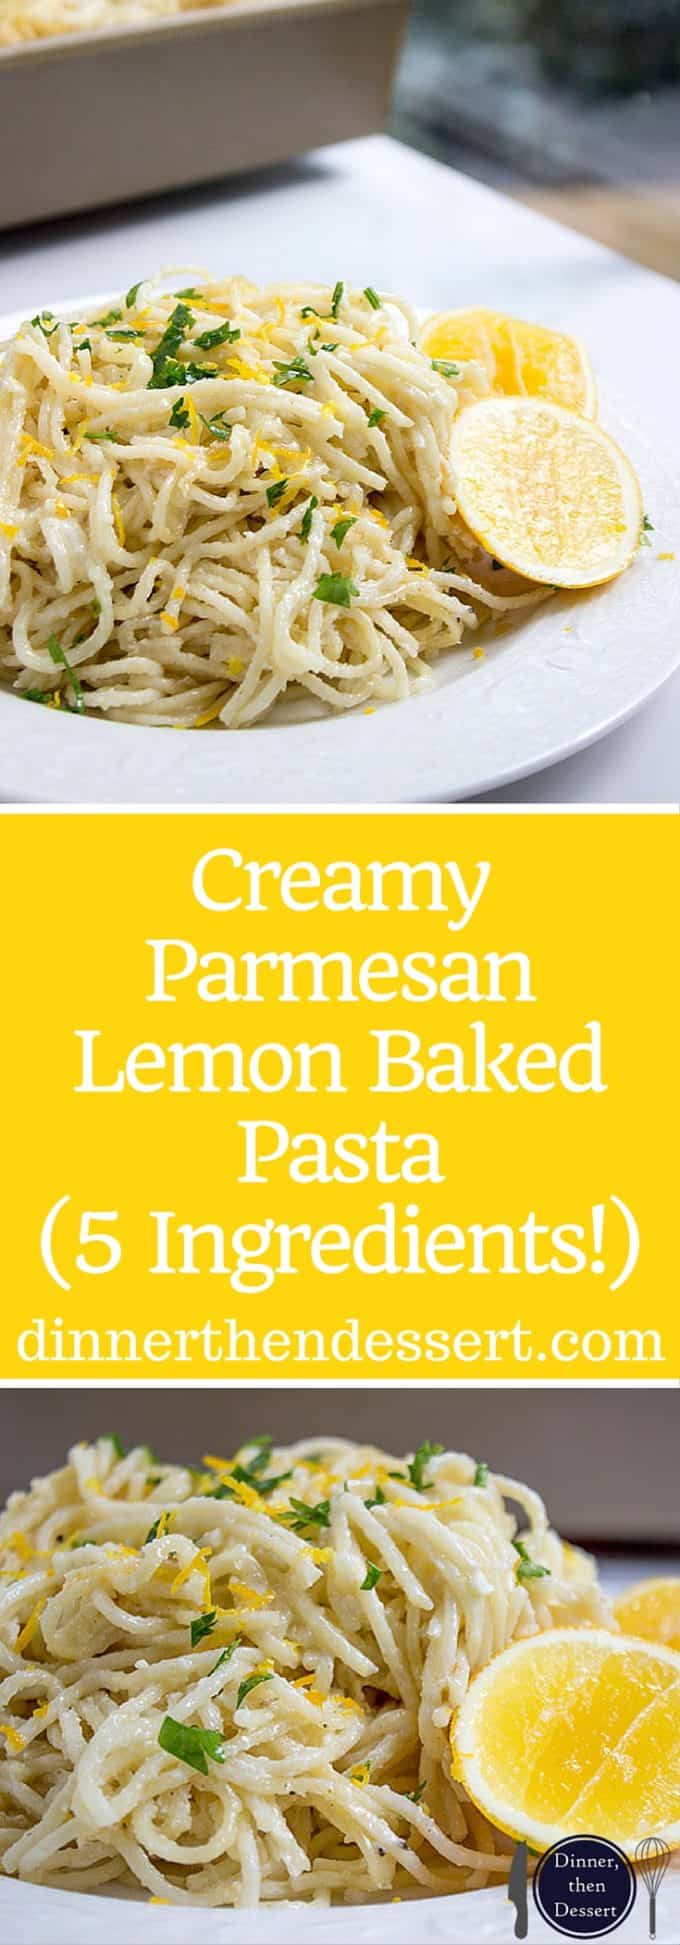 Creamy Parmesan Lemon Baked Pasta made with just 5 ingredients (plus salt, pepper and olive oil)! Crispy on top and creamy inside with fresh lemon juice and lemon zest on top.